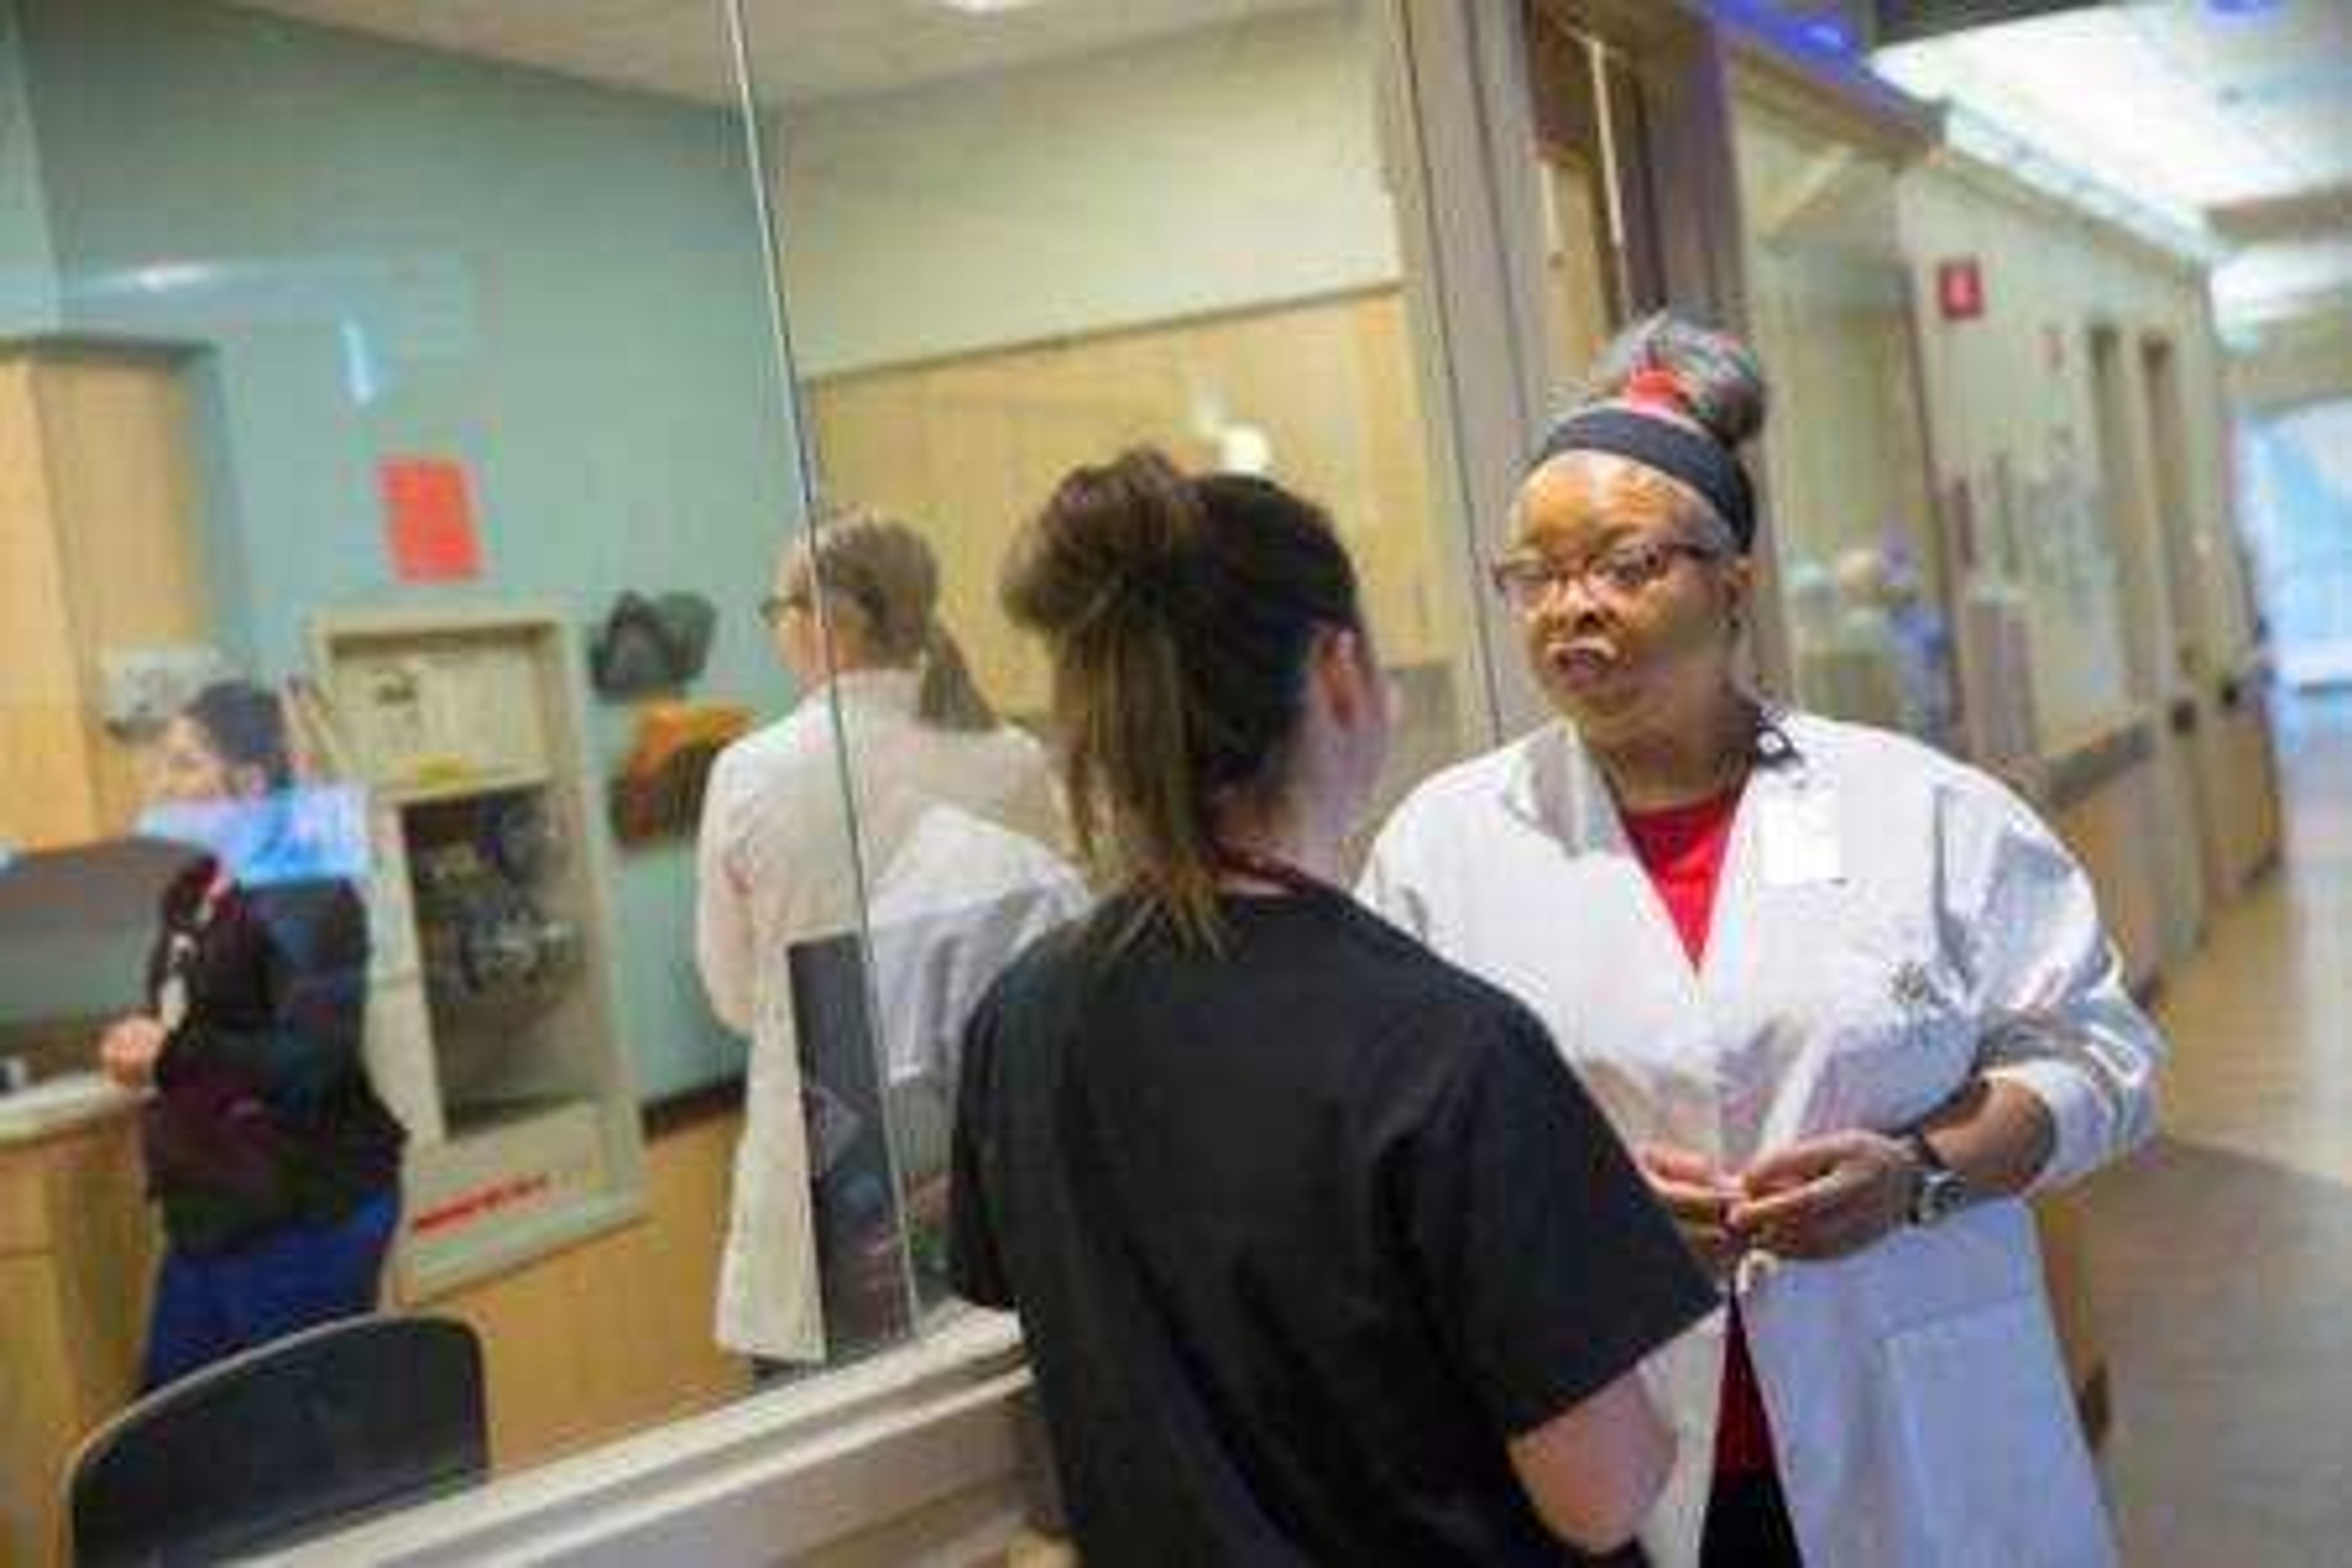 “Humble beginnings:” Southeast professor reflects on 40 years as a Black nurse in Cape Girardeau